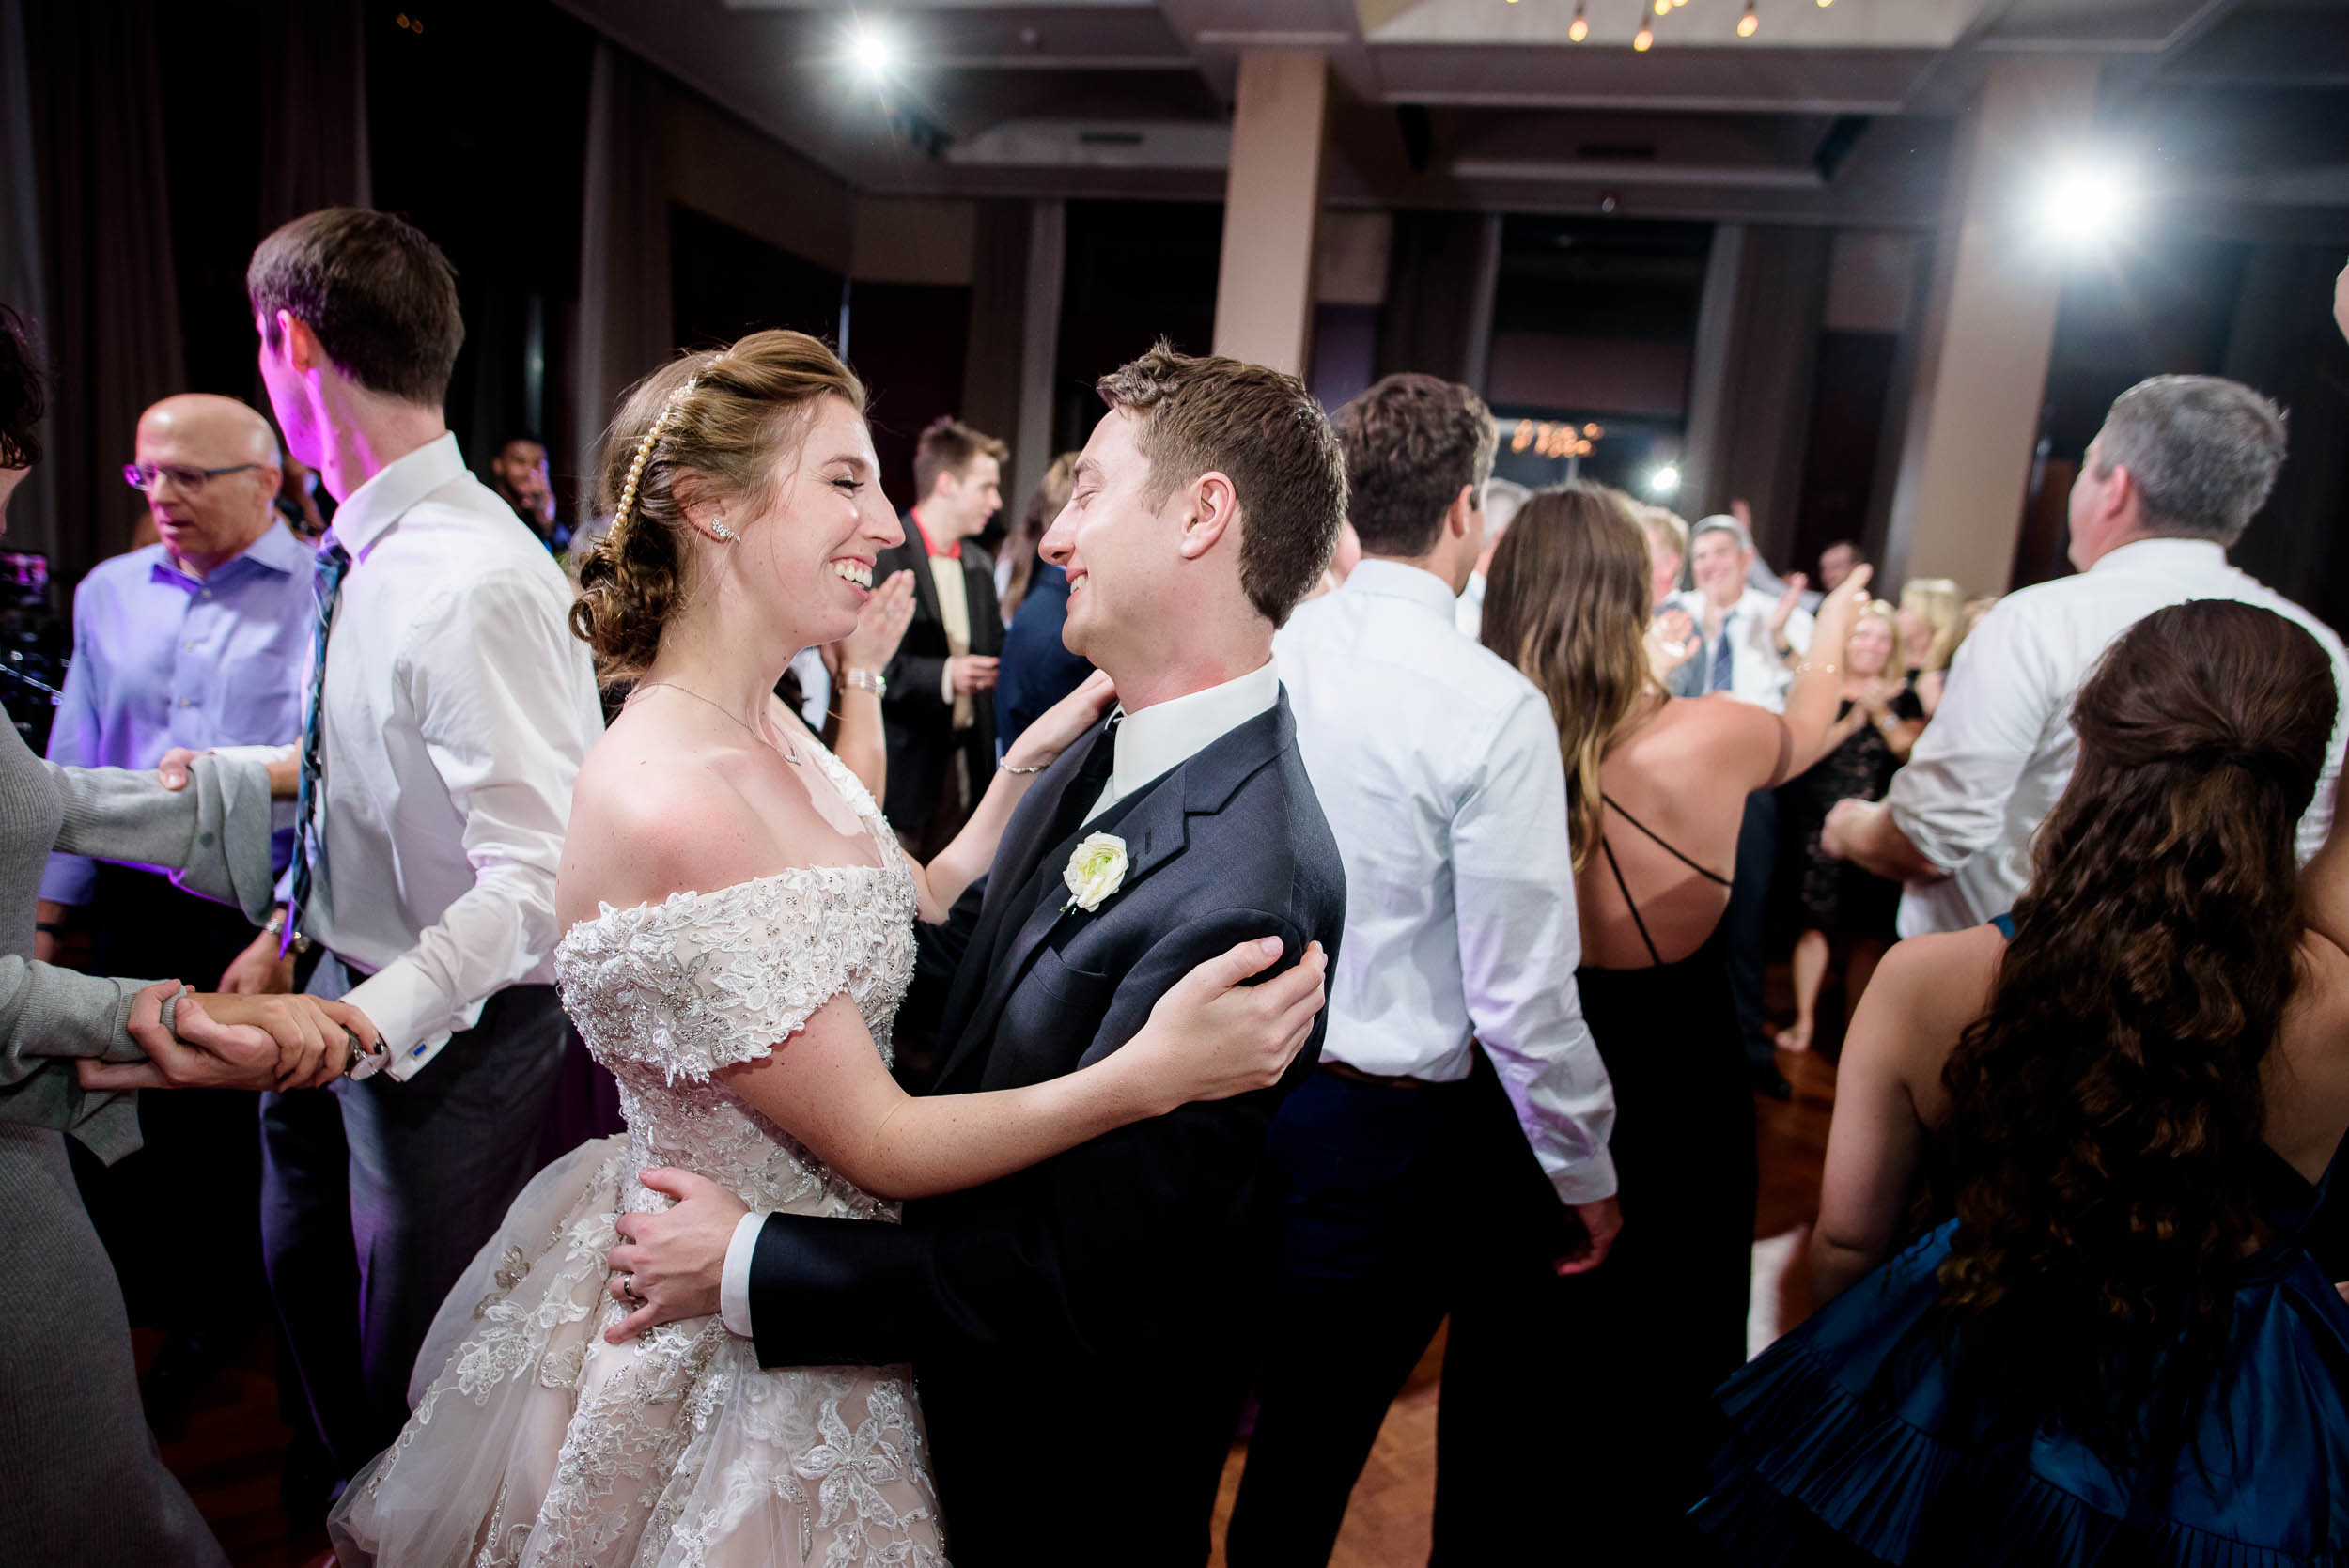 Fun dance floor moment during a Newberry Library Chicago wedding.